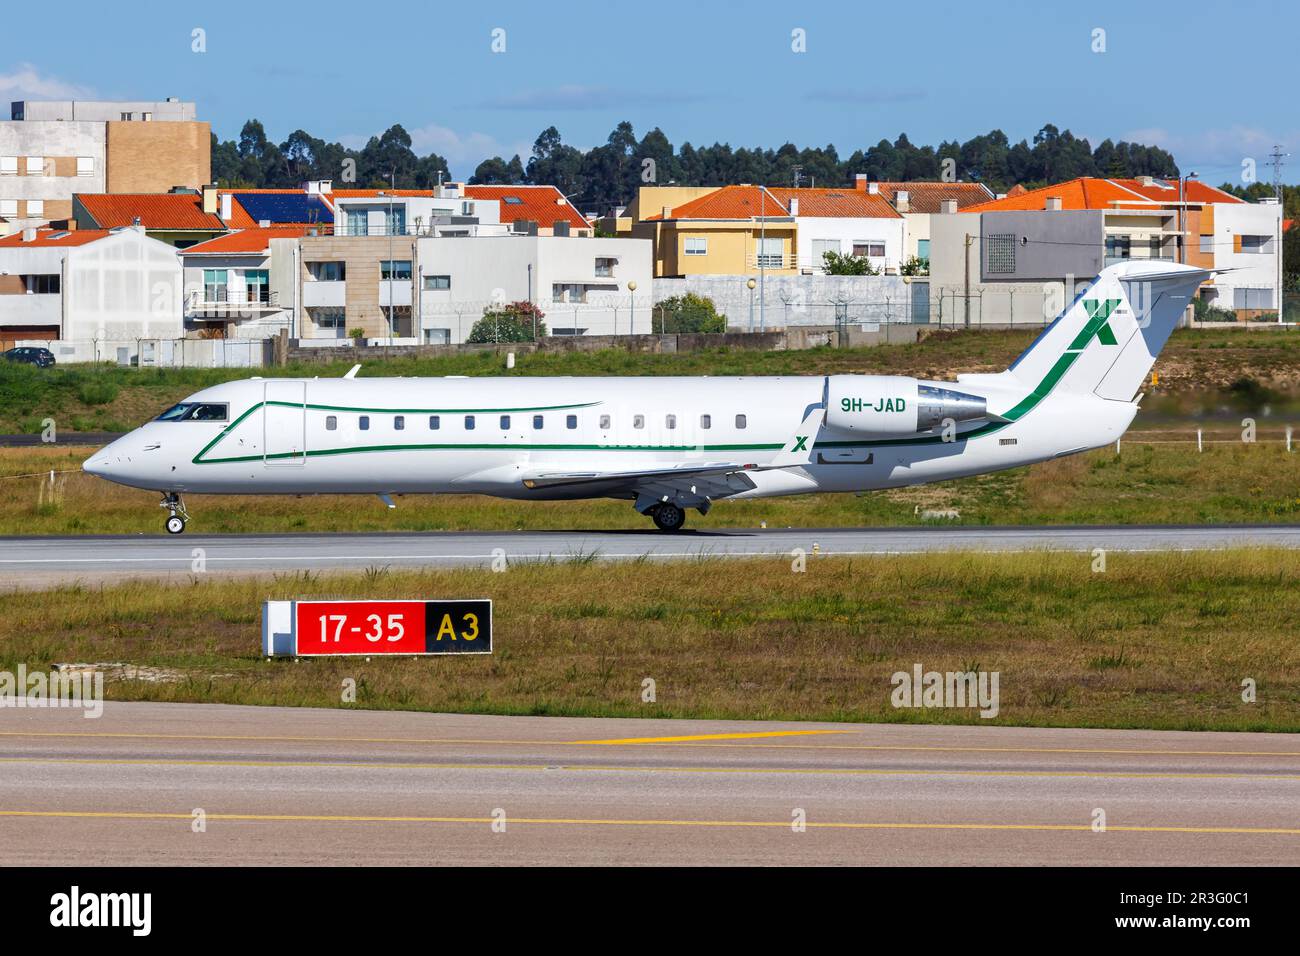 Air X Charter Bombardier Challenger 850 aircraft Porto Airport in Portugal Stock Photo